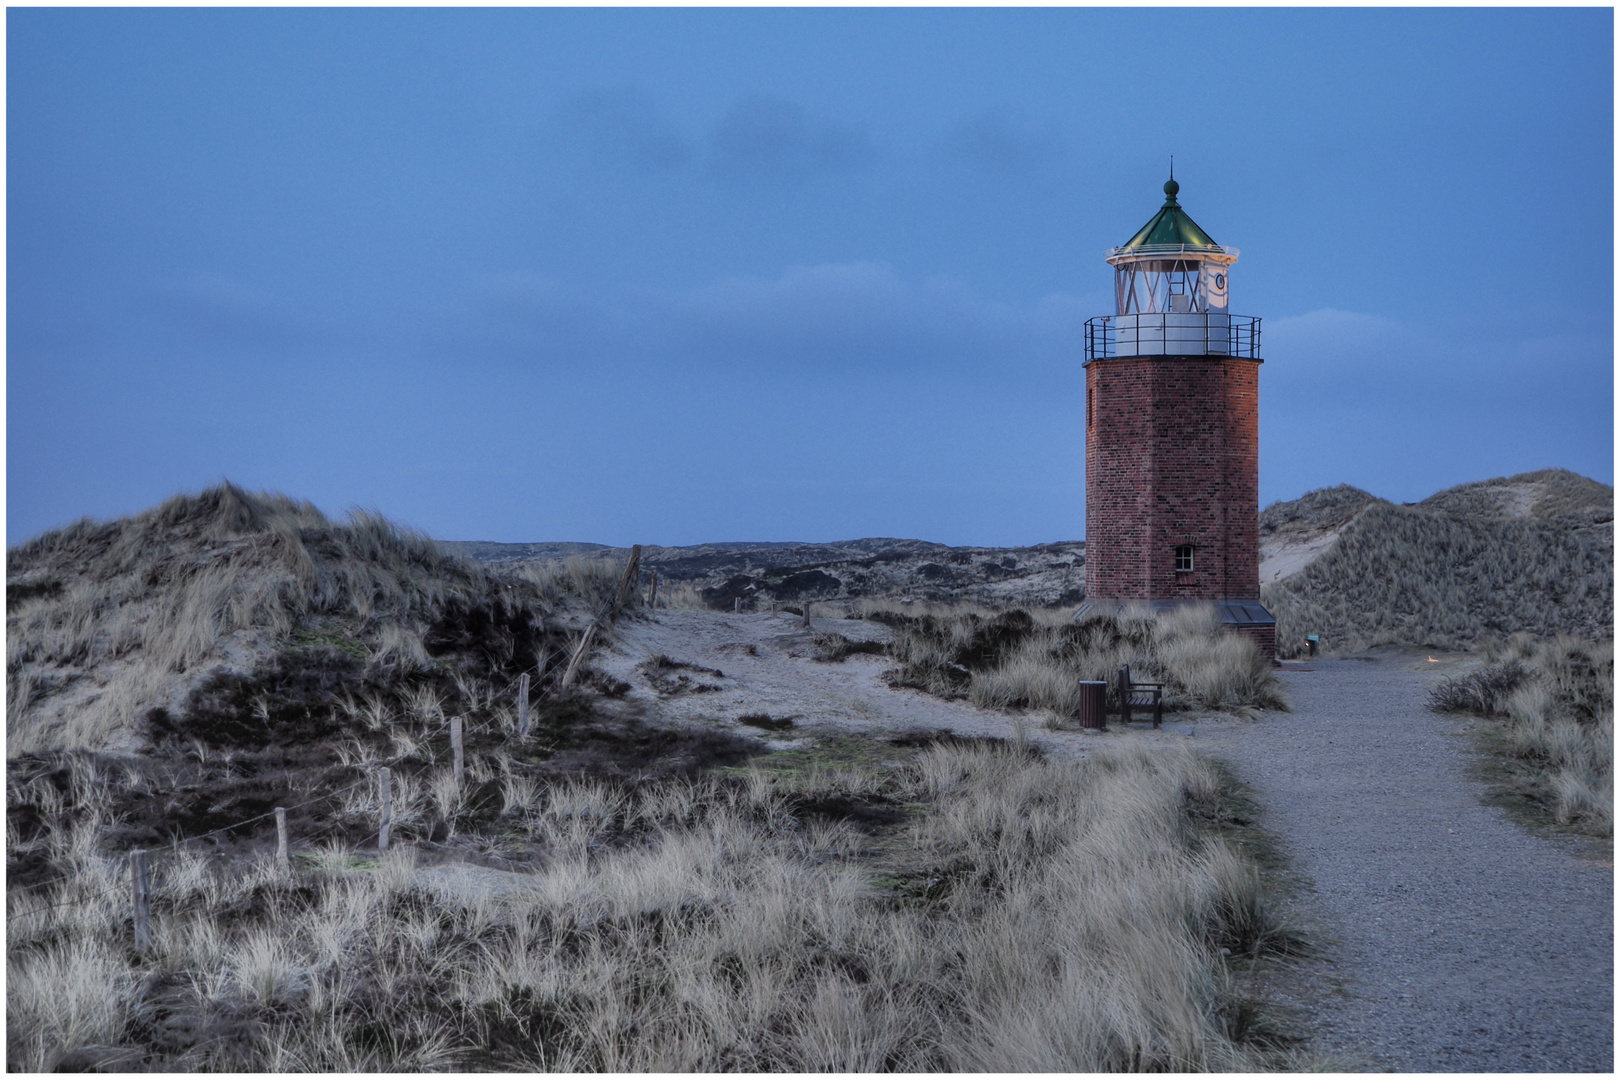 Blue hour at the lighthouse